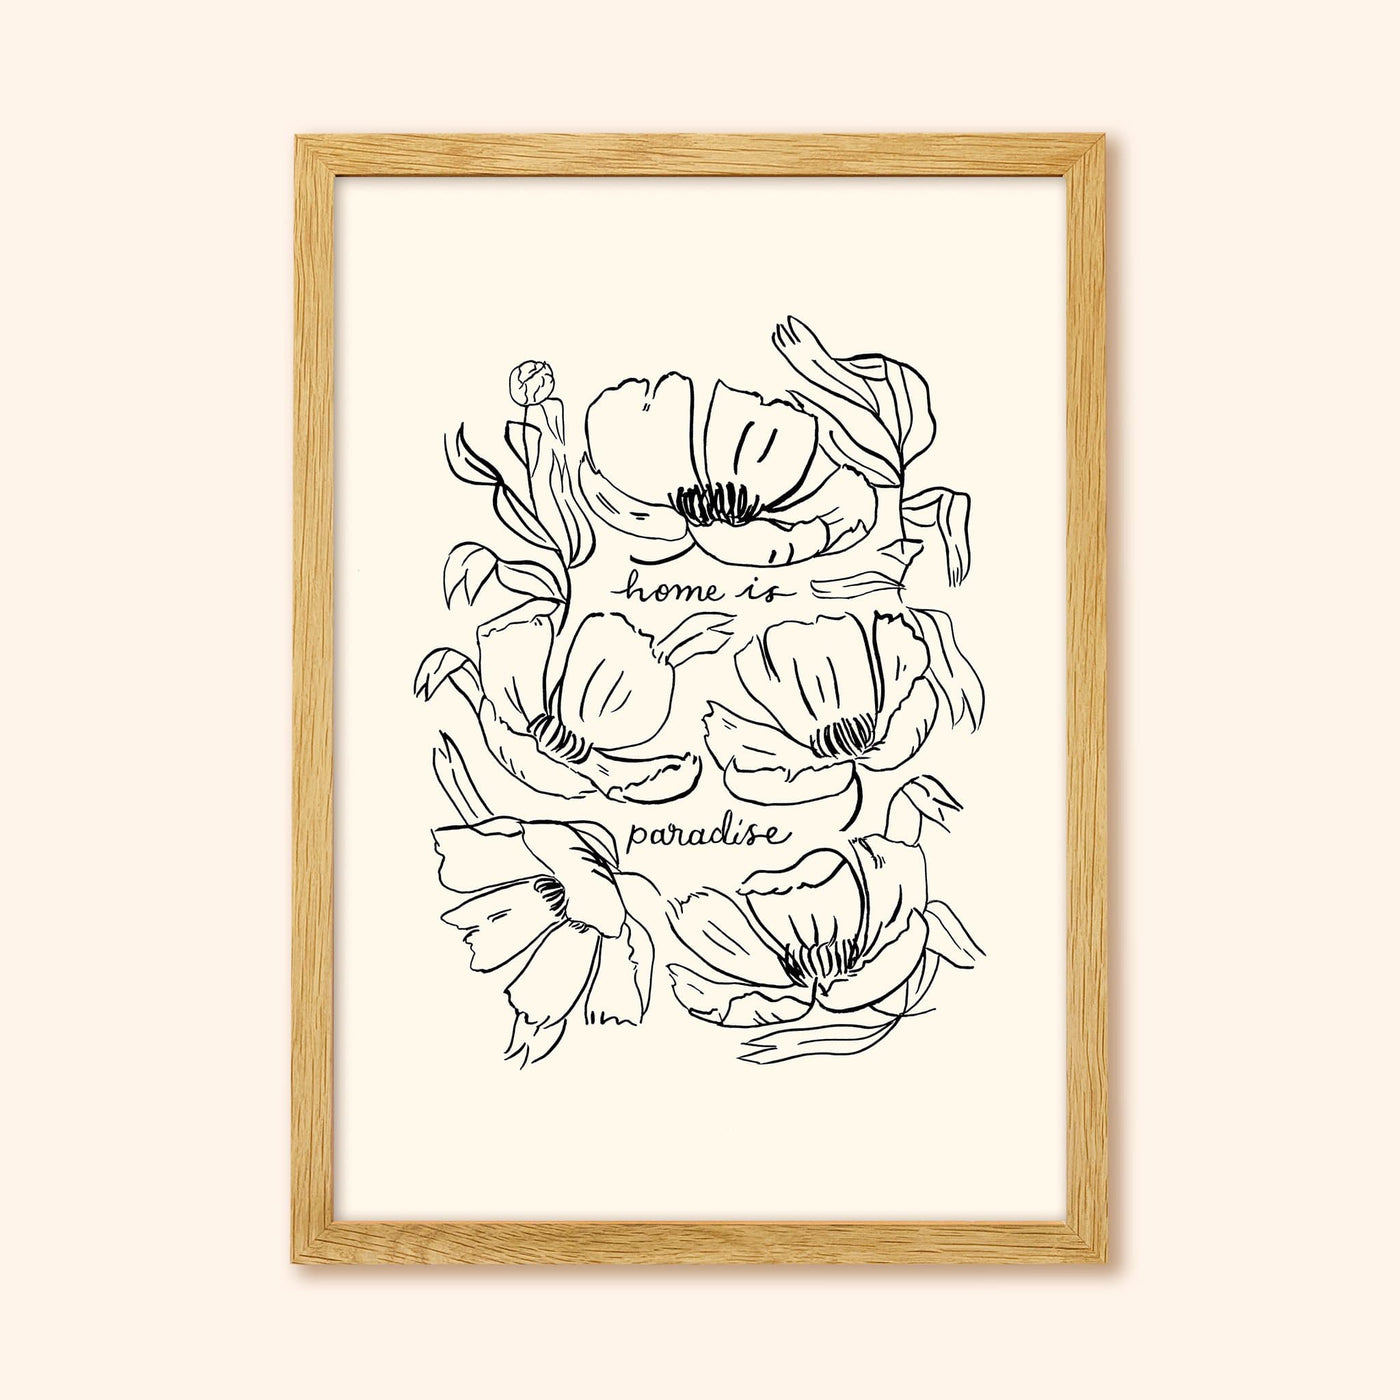 Black Floral Line Art Work Print With The Words Home Is Paradise In An Oak Frame - Annie Dornan Smith